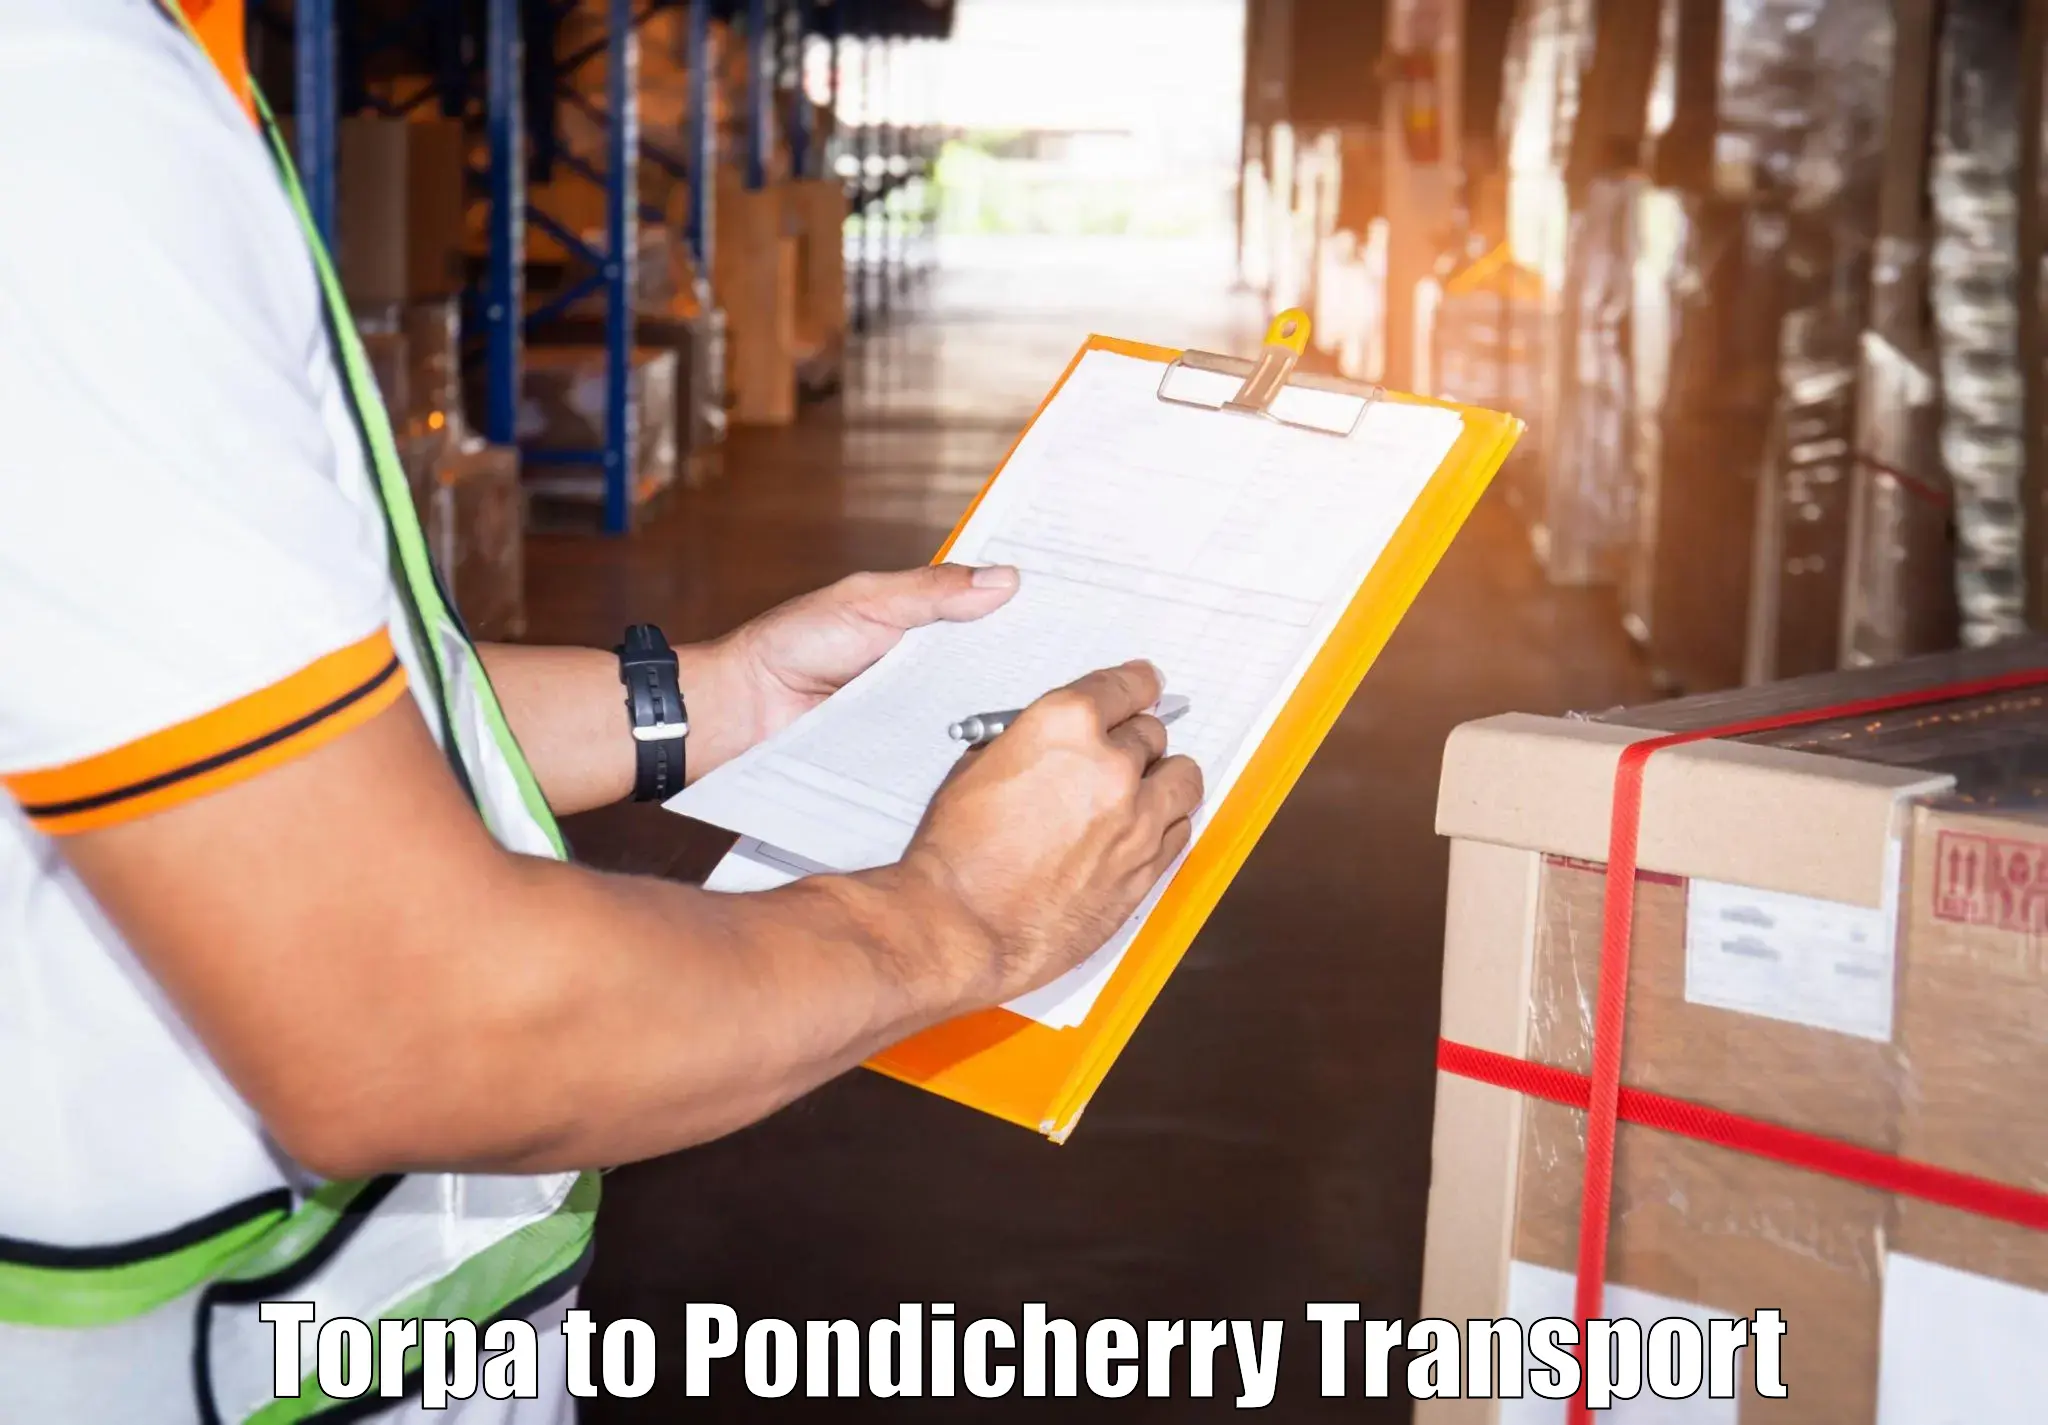 Container transport service Torpa to Pondicherry